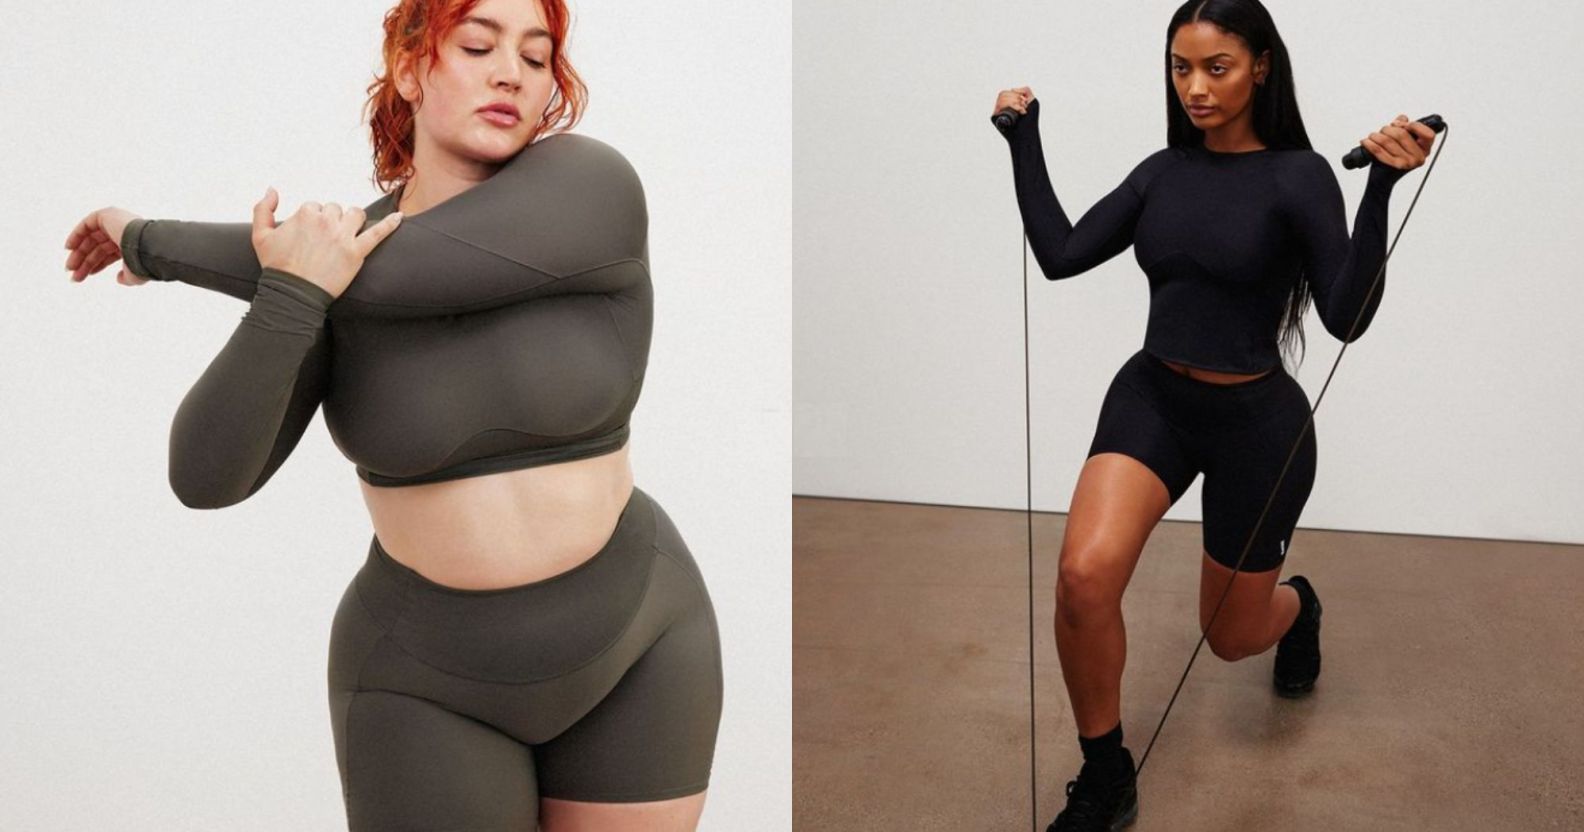 Kim Kardashian and Skims have released their first ever workout collection.